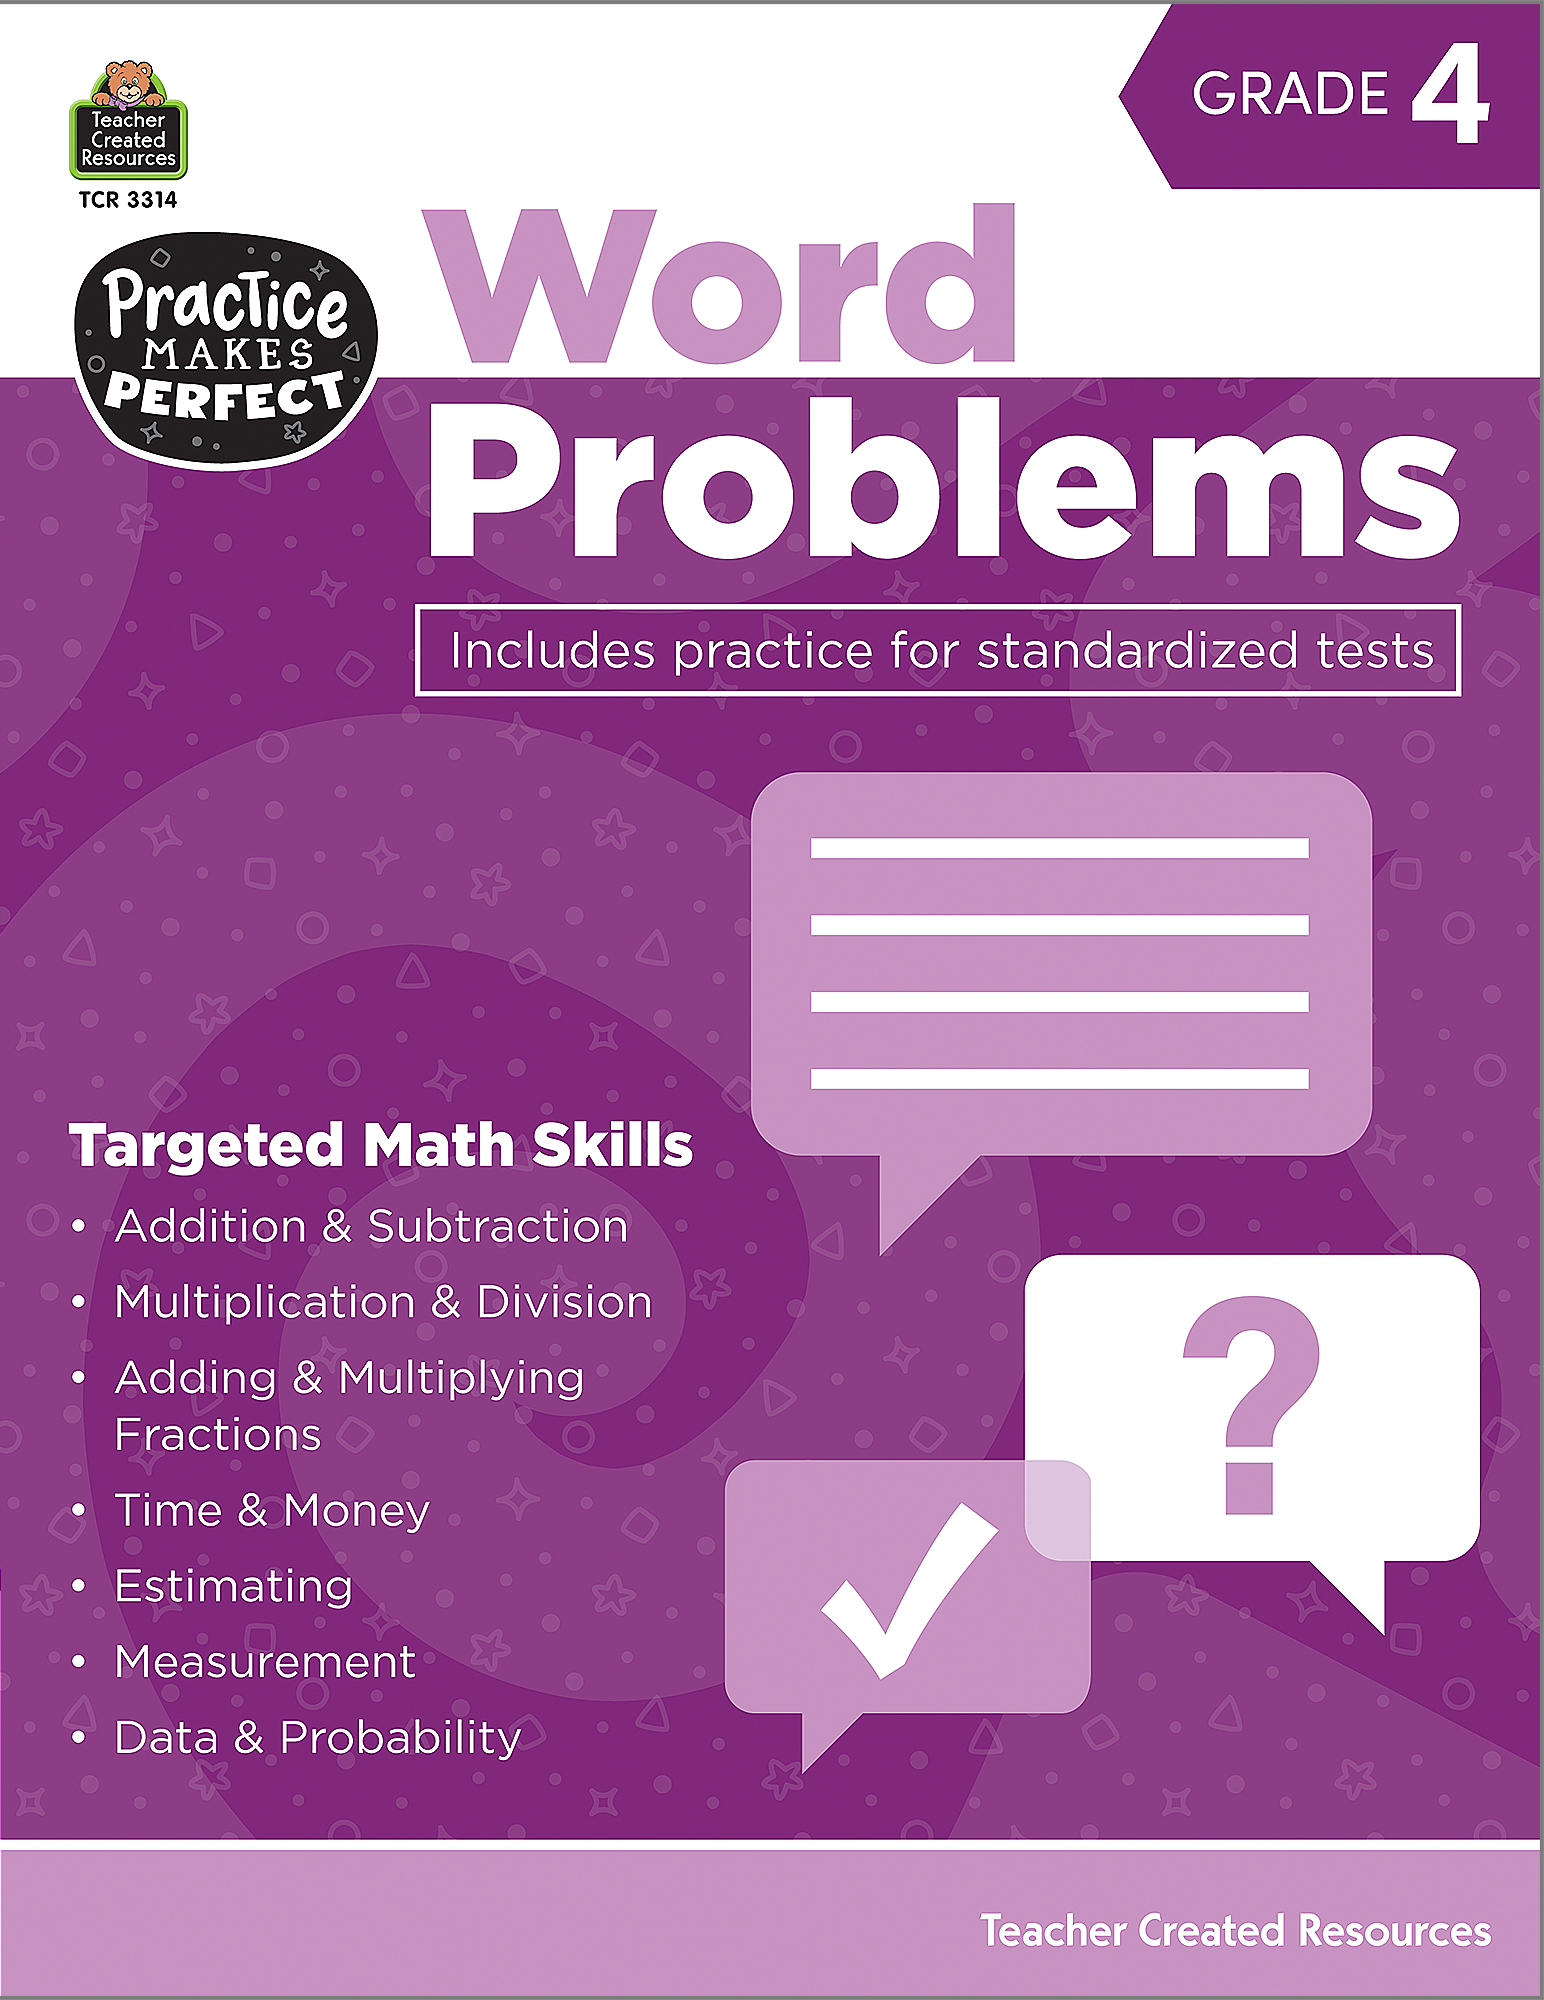 Word Problems Grade 4 - TCR3314 | Teacher Created Resources